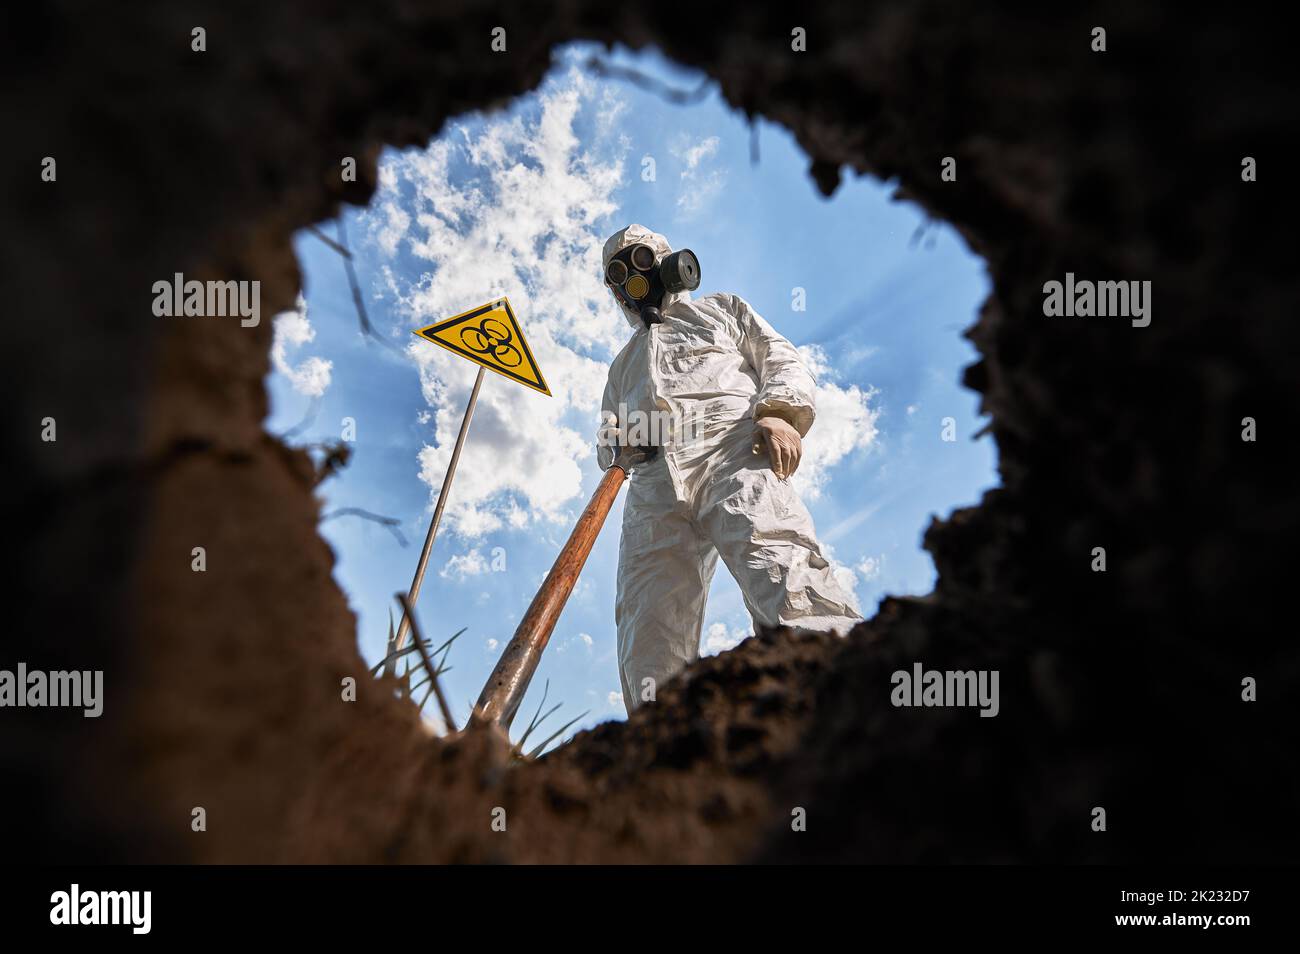 Below view on male ecologist digging pit by shovel, wearing protective overalls and gas respirator near biohazard symbol warning about dangerous biological materials. View from inside pit. Stock Photo